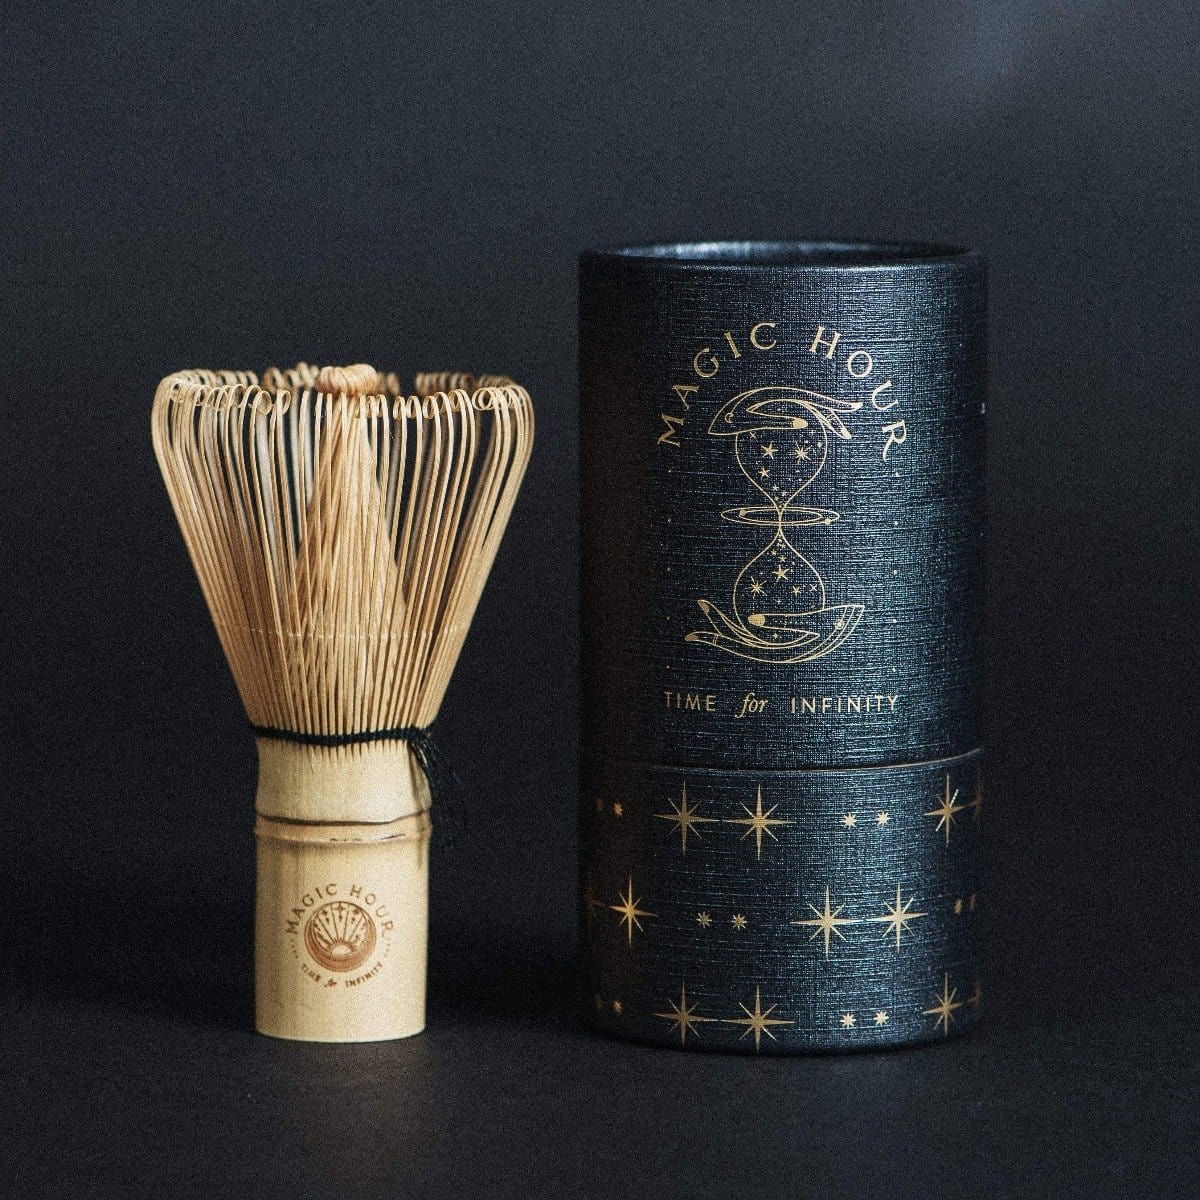 An Artisanal Magic Hour Matcha Whisk designed for matcha tea preparation stands next to a cylindrical black container adorned with gold celestial designs and the text "MAGIC HOUR" and "TIME for INFINITY." Both items, perfect accompaniments to your organic tea ritual, are set against a dark background.